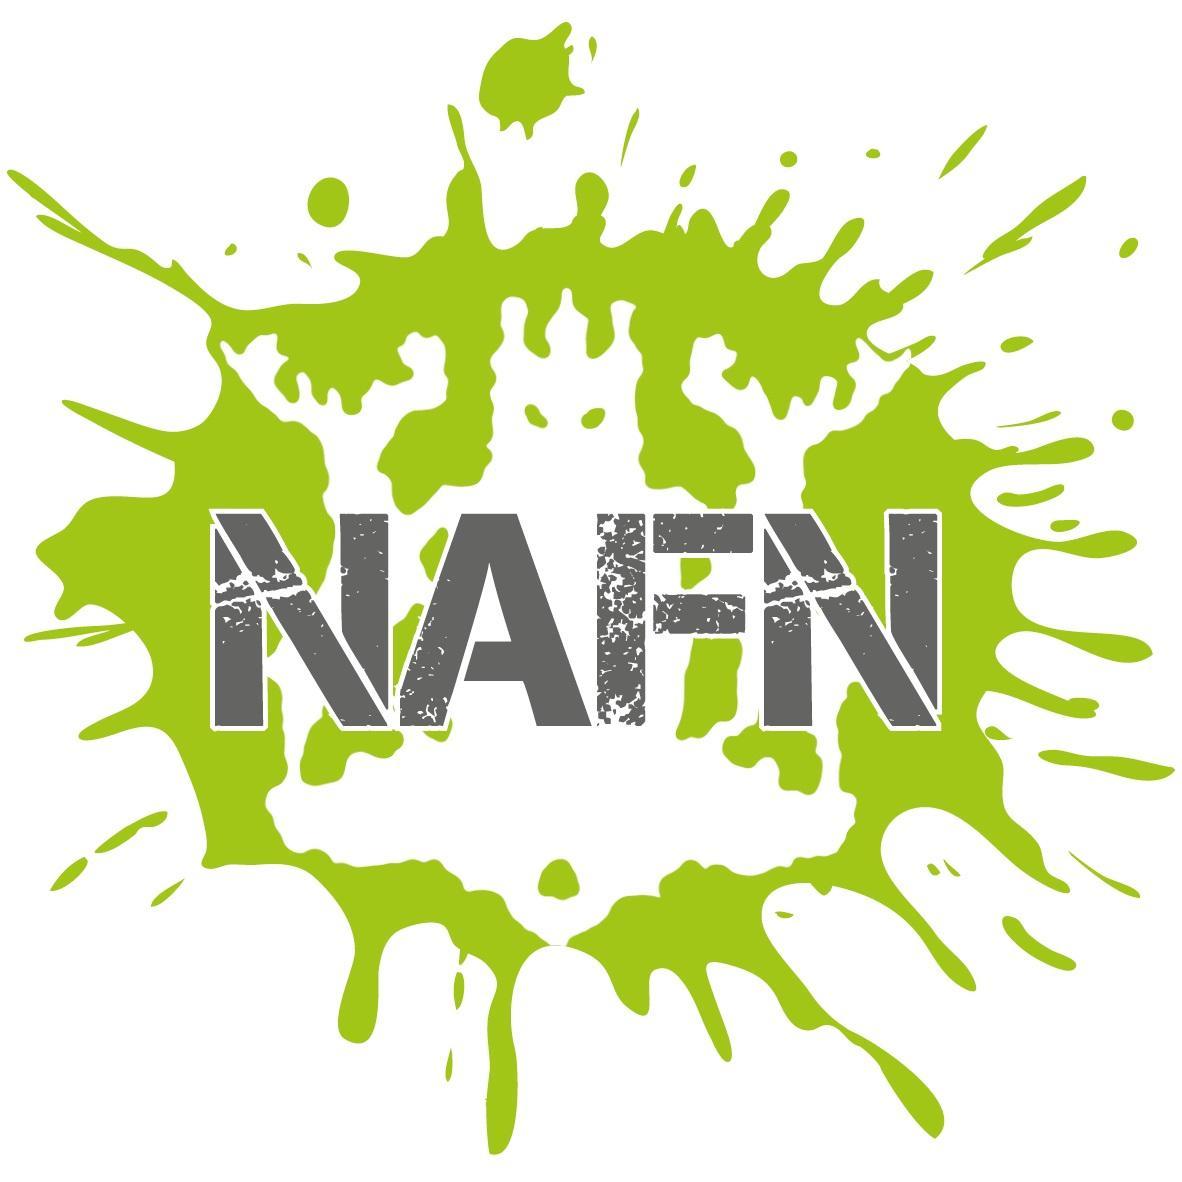 We're the Nottingham Alternative Film Network. We're mad about #Nottingham and films you wouldn't get to see otherwise!